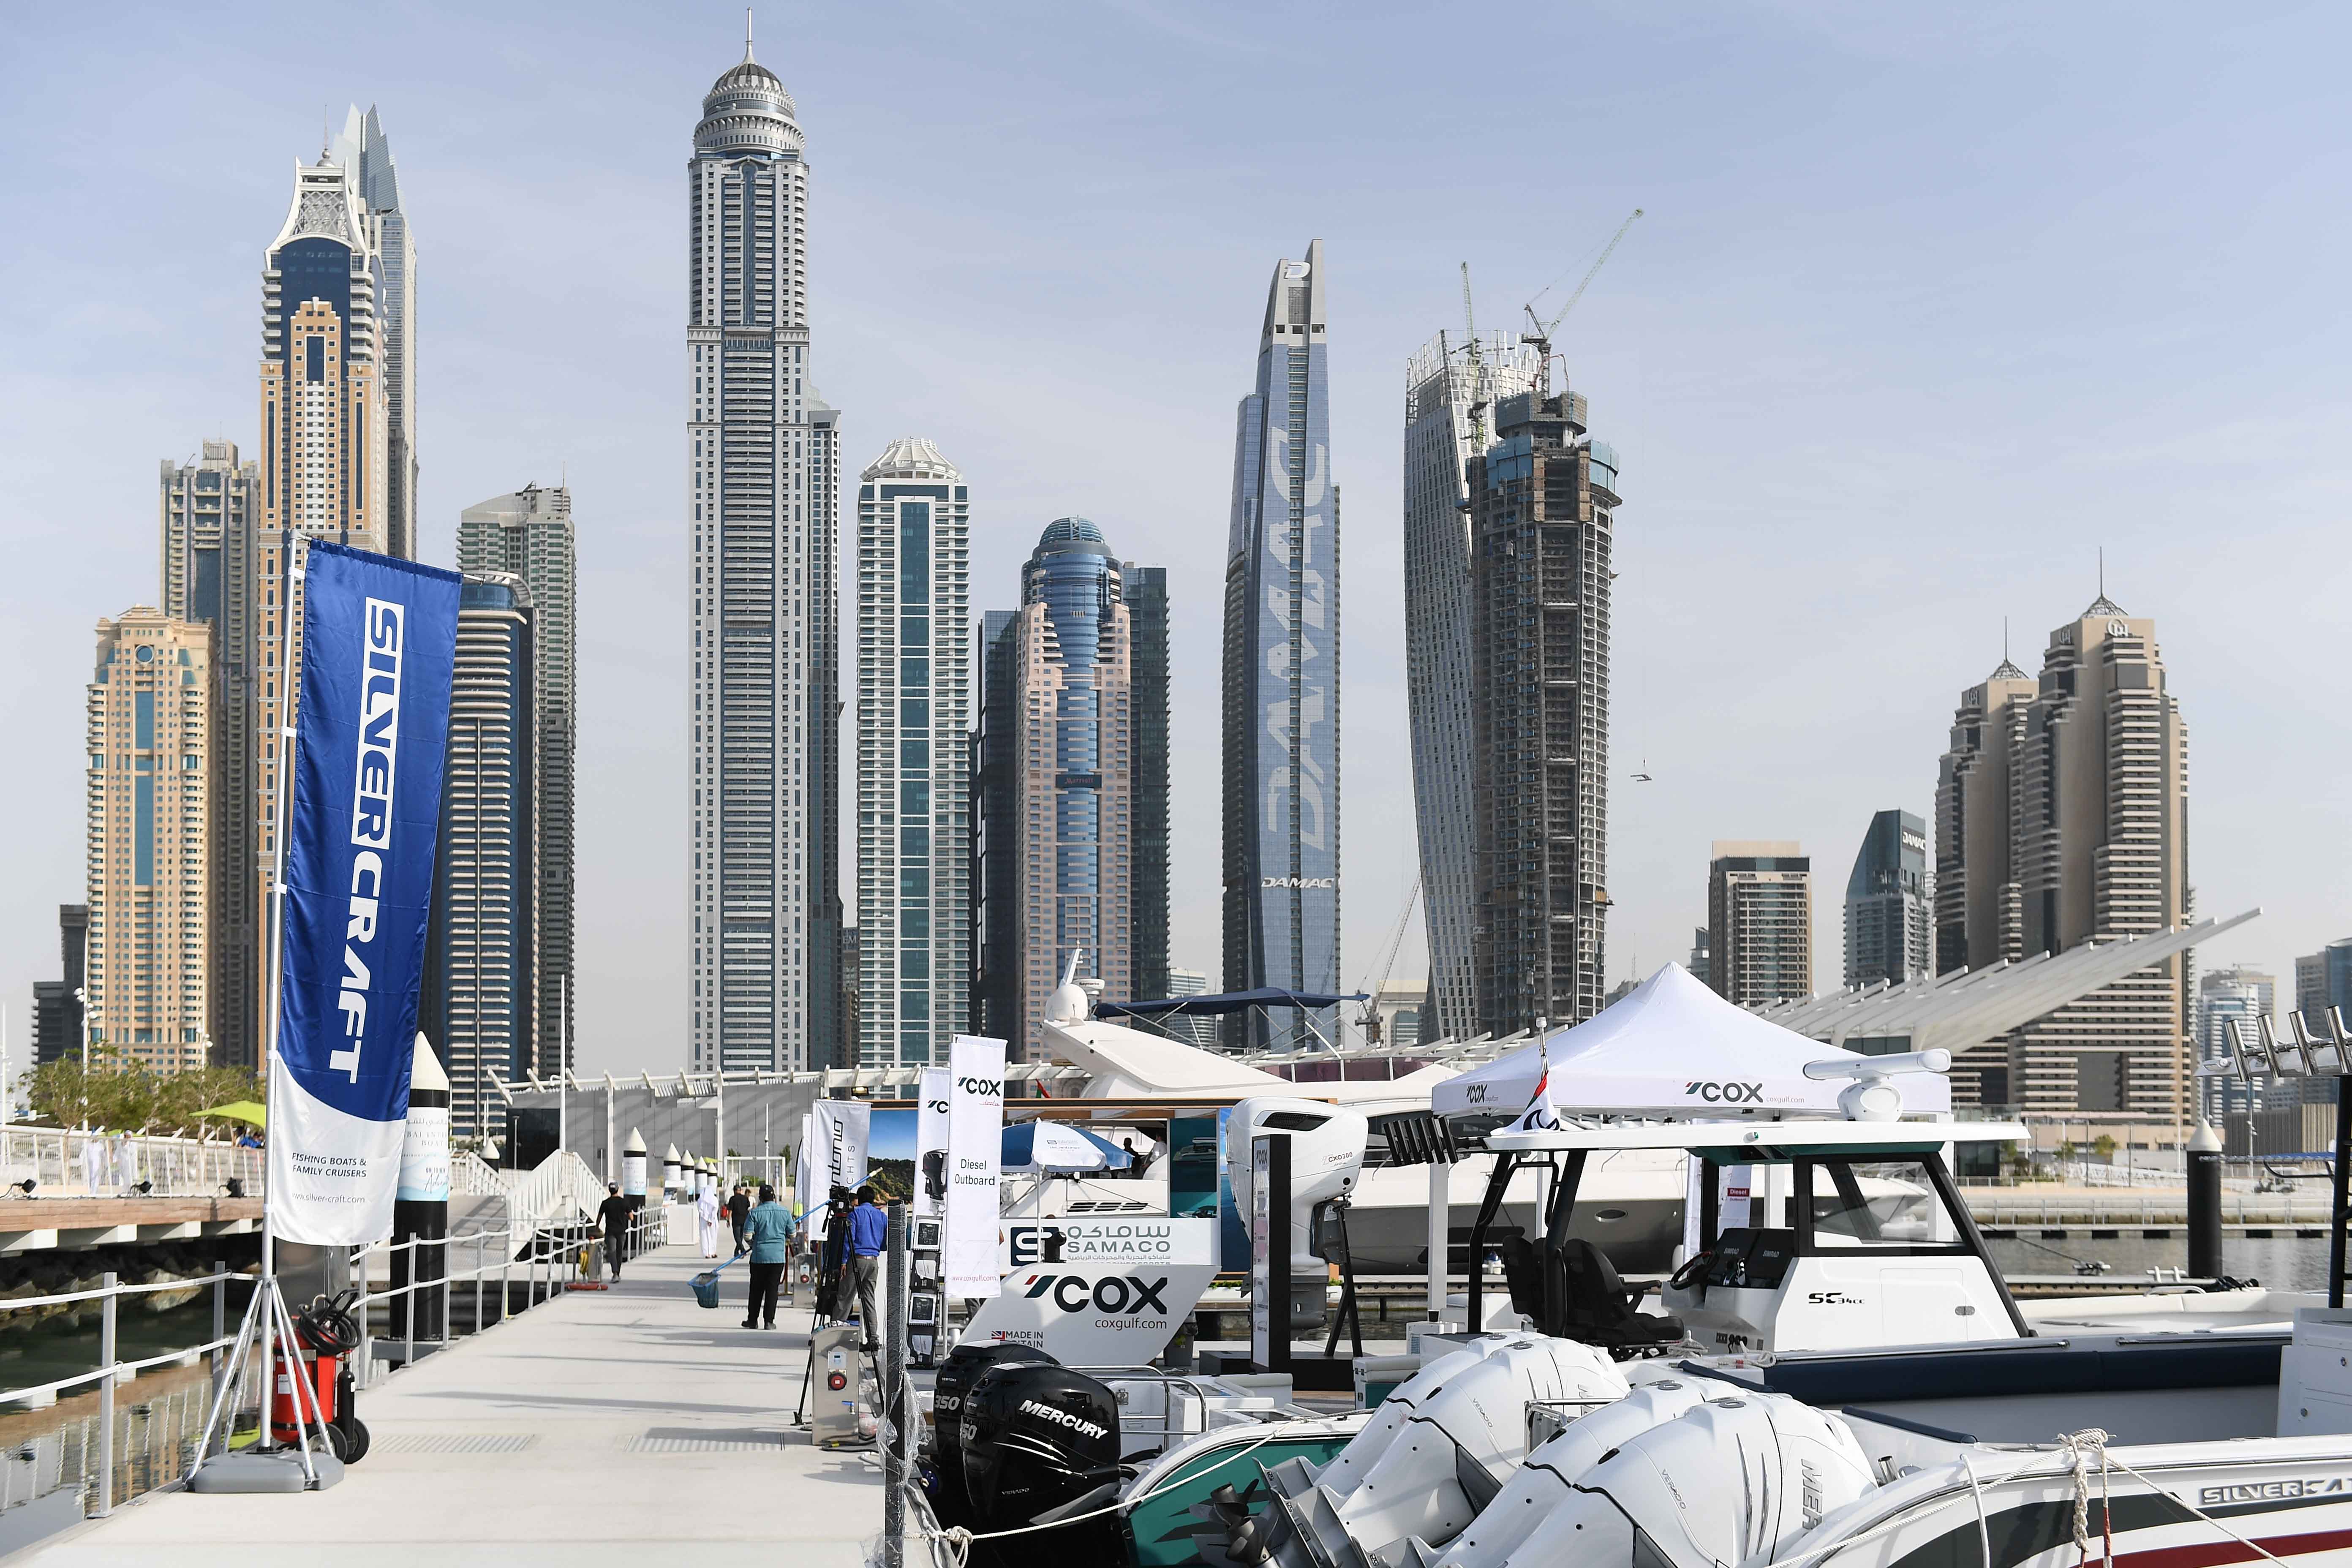 ‘SUPERYACHT NFTS’, ELECTRIC SURFBOARDS: TOP THINGS TO SEE AT DUBAI INTERNATIONAL BOAT SHOW